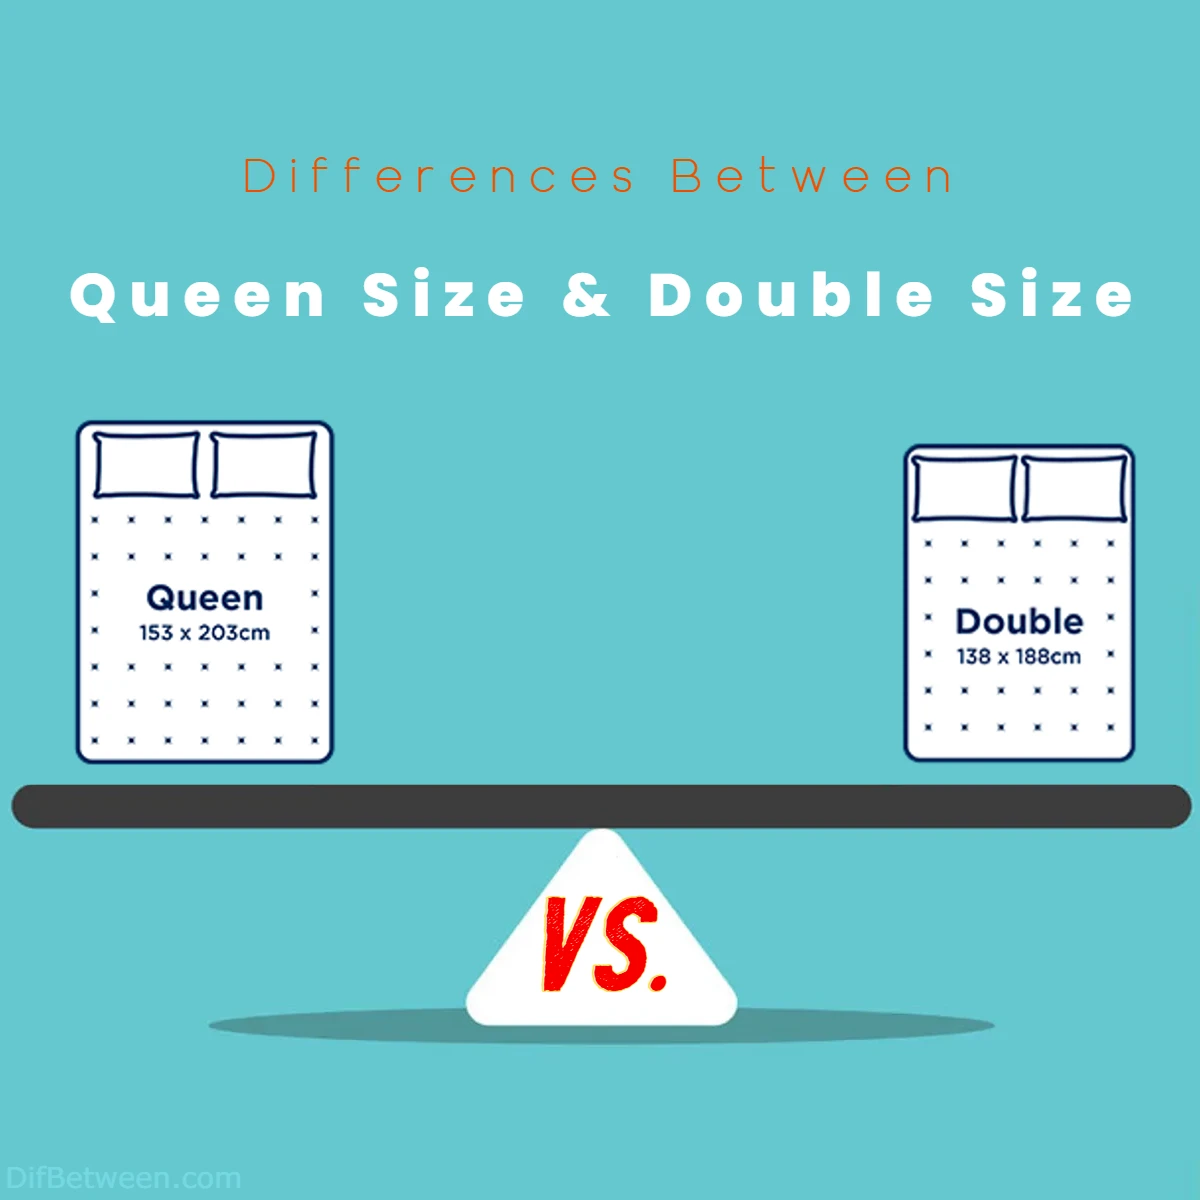 Differences Between Queen Size vs Double Size